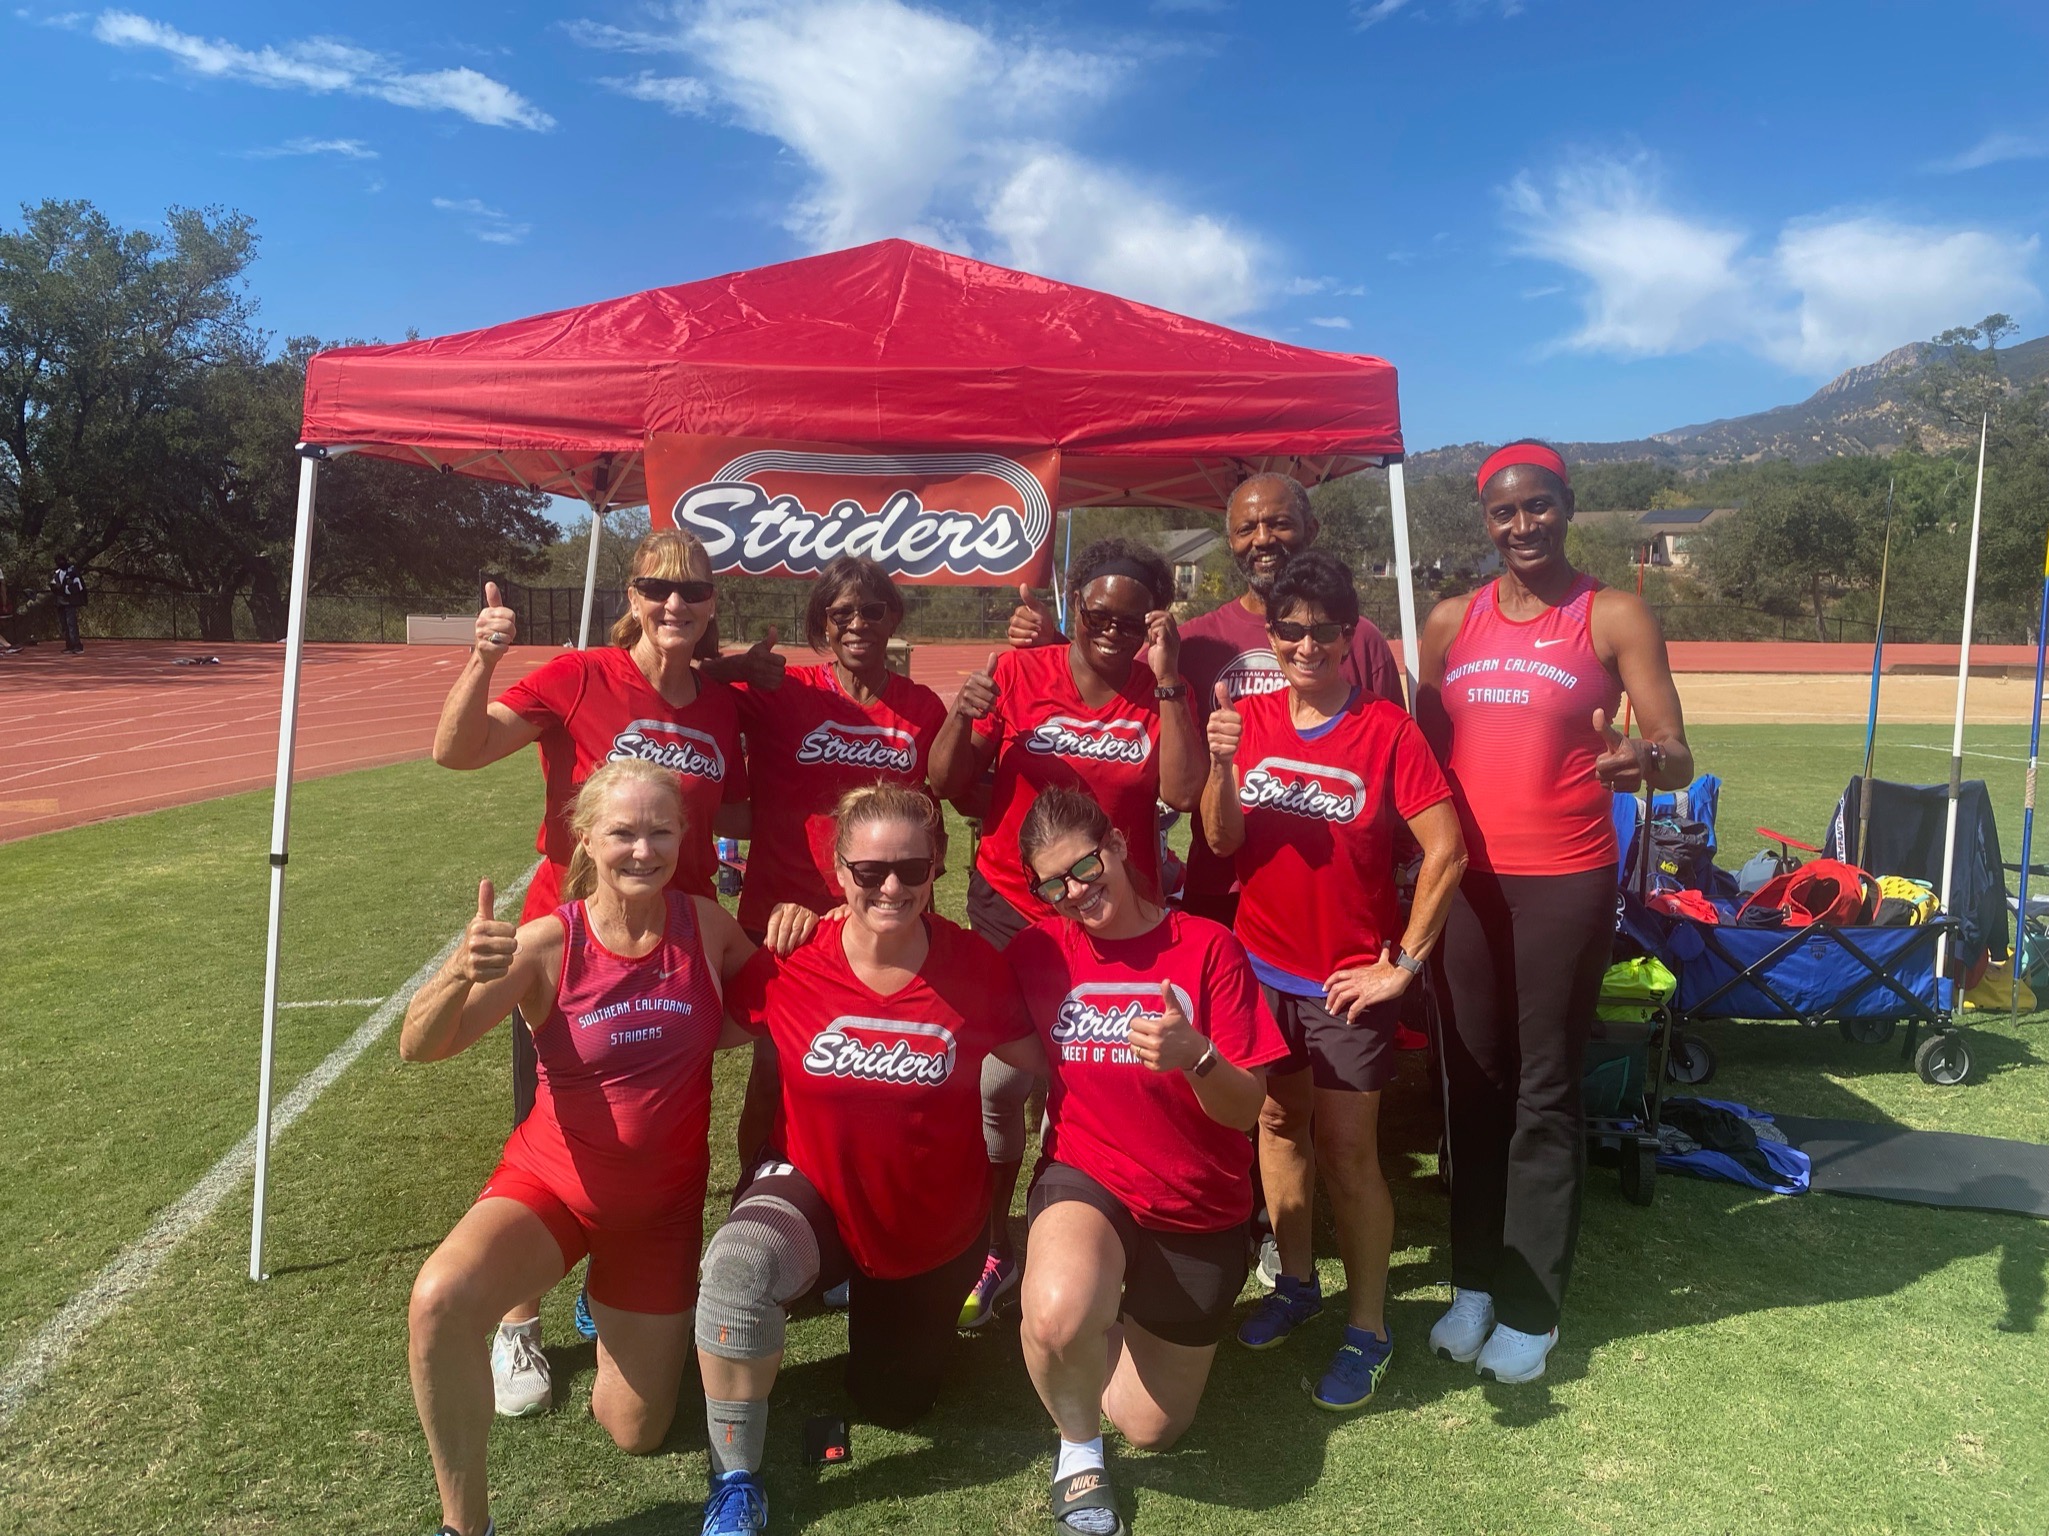 The Southern California Striders Win The 2021 Club West Tri Meet